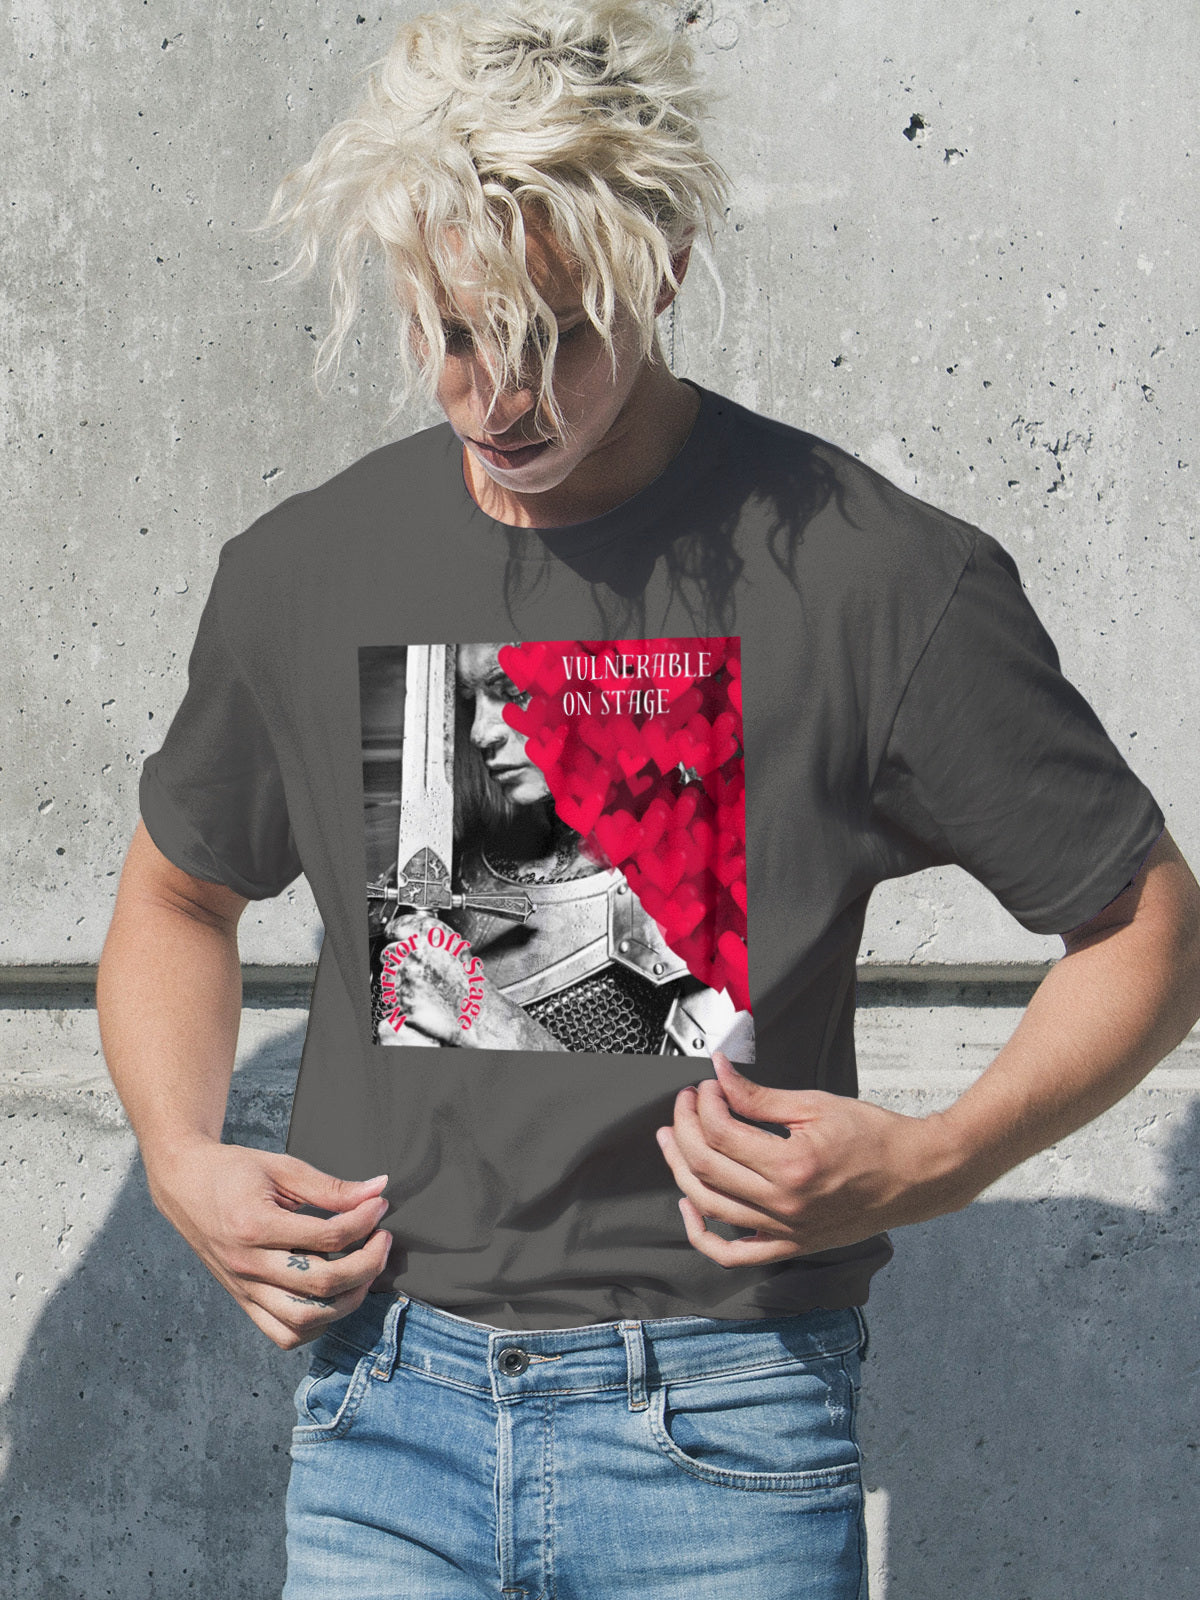 A bold and stylish Unisex Artist Vulnerable Warrior T-Shirt in Classic design, specifically crafted for Female Artists The shirt features empowering graphics, celebrating authenticity on stage and fierce warrior strength off stage. Perfect for making a statement in the world of art and beyond.